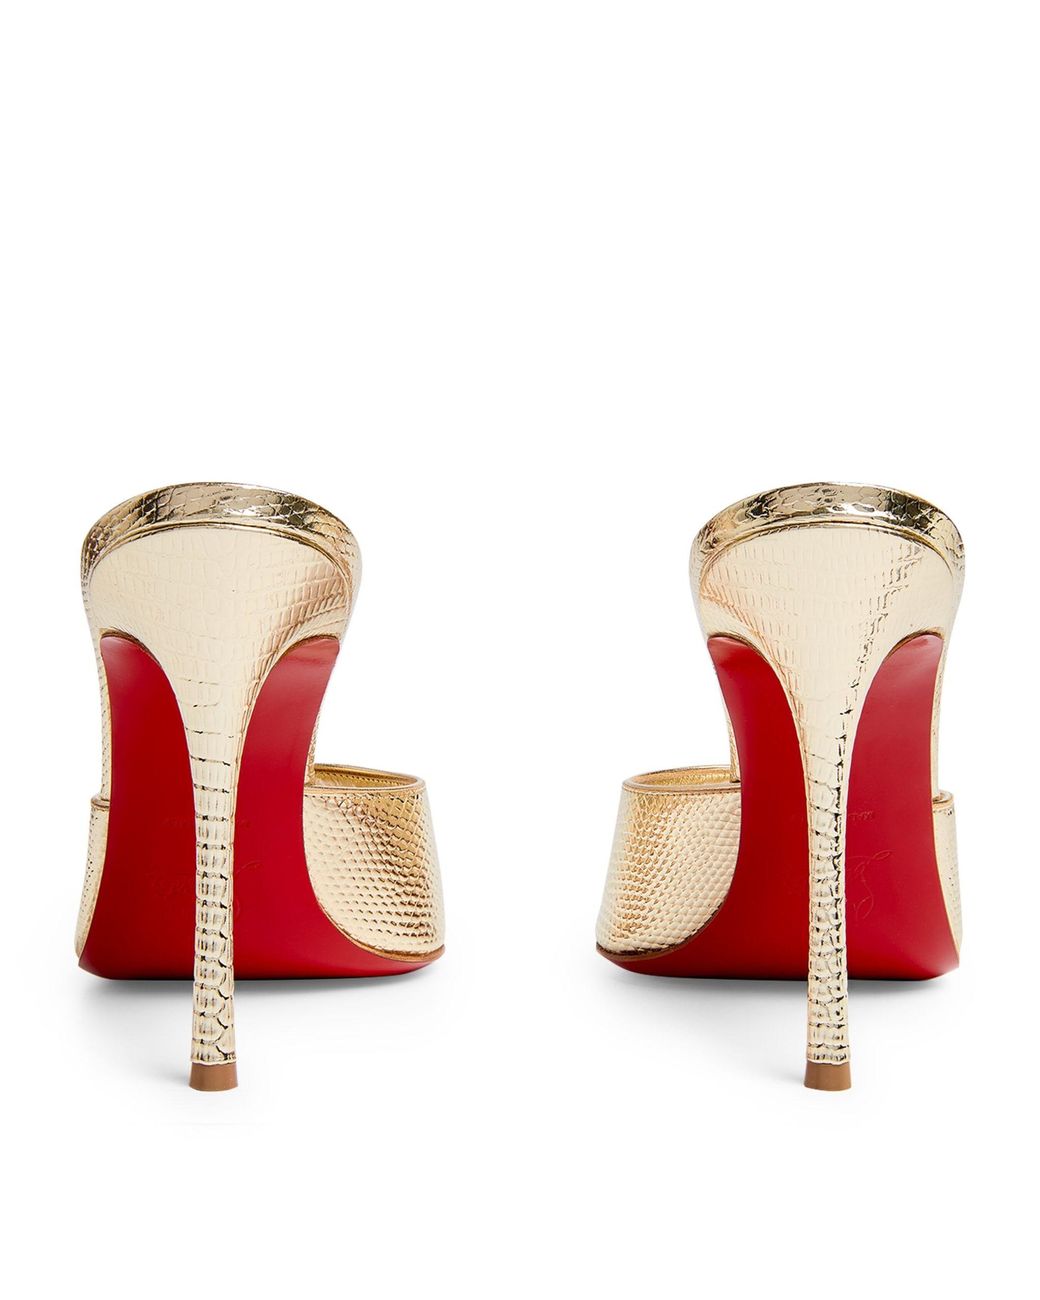 Me Dolly Strass 100 Gold Suede - Shoes - Women - Christian Louboutin